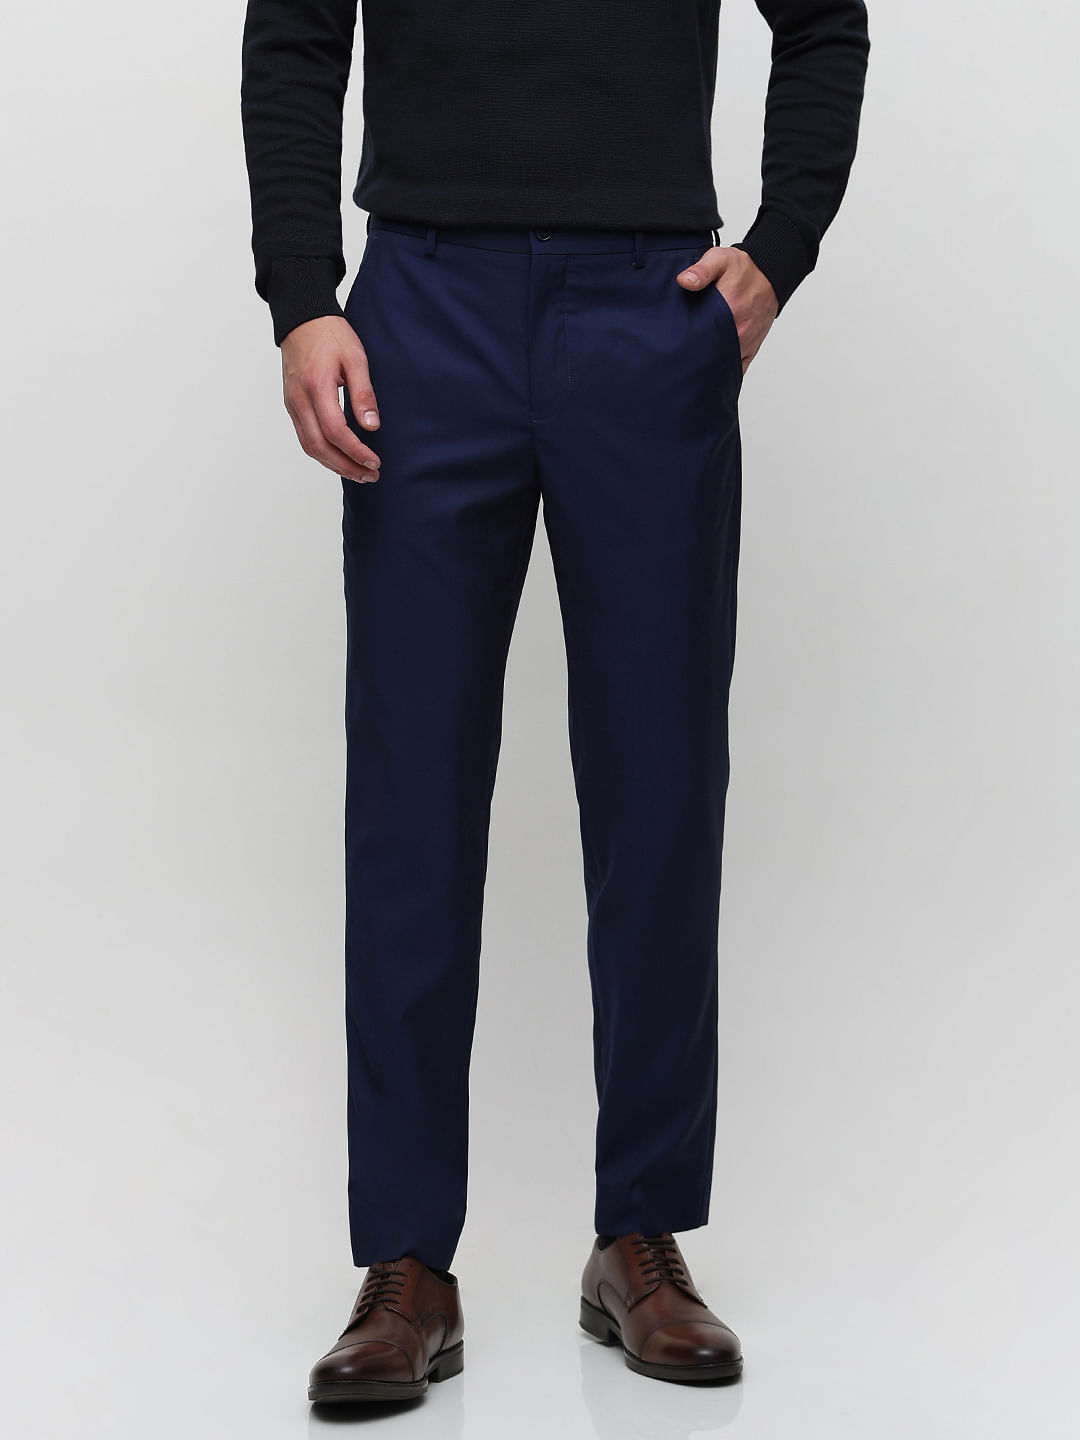 Navy Blue Trousers Classic Plain Straight Smart Pull Up Half Elastic